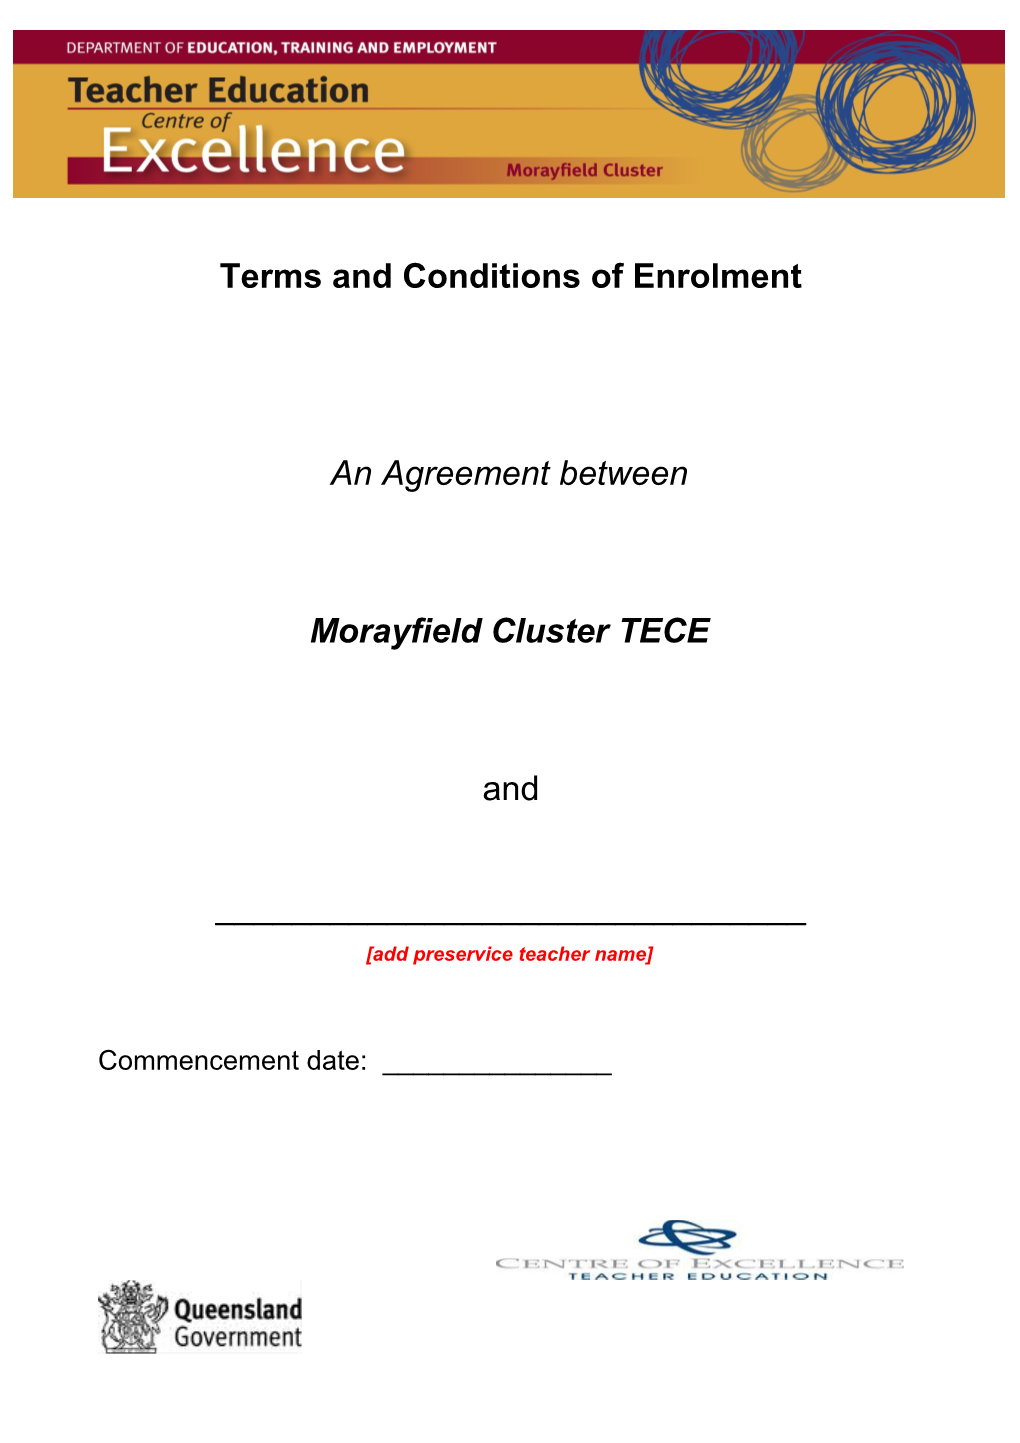 Terms and Conditions of Enrolment